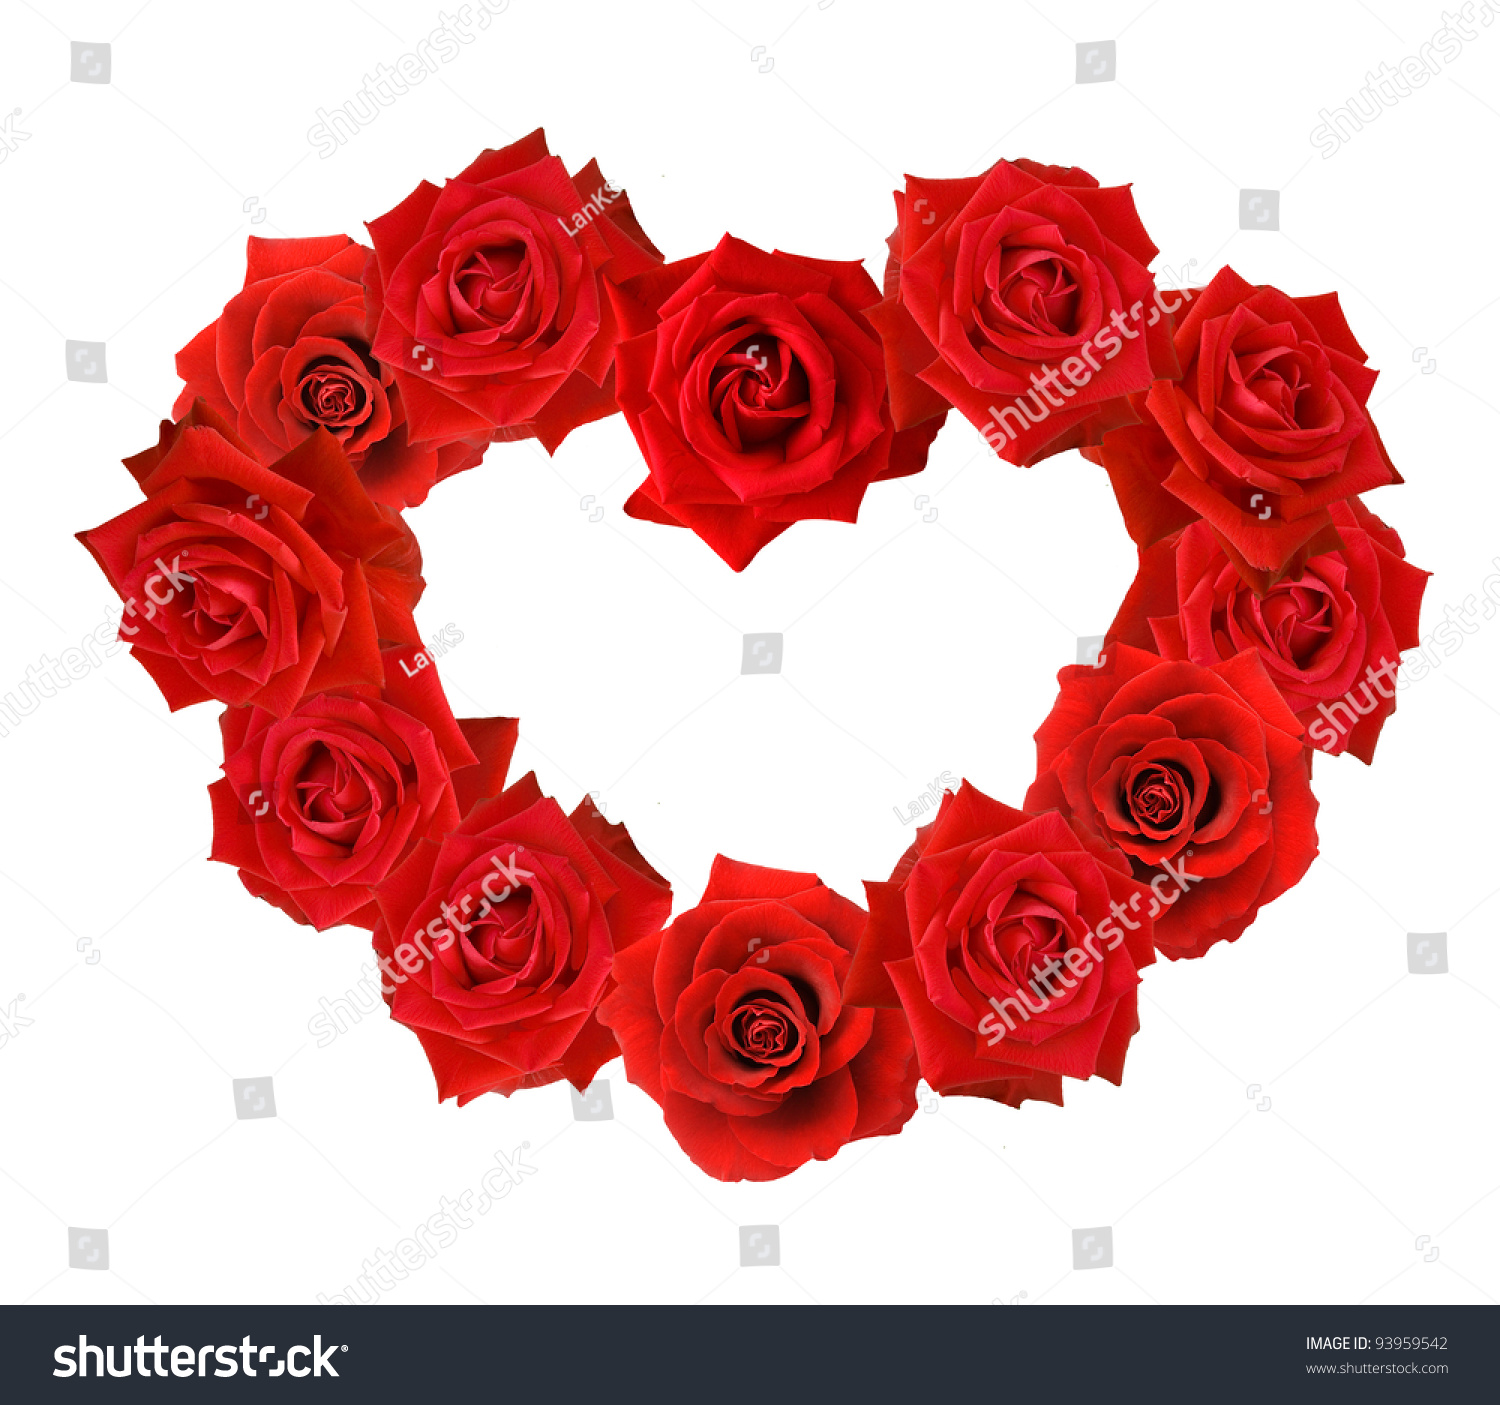 Red Roses In Heart Shape Bunch Isolated On White With Sample Text ...